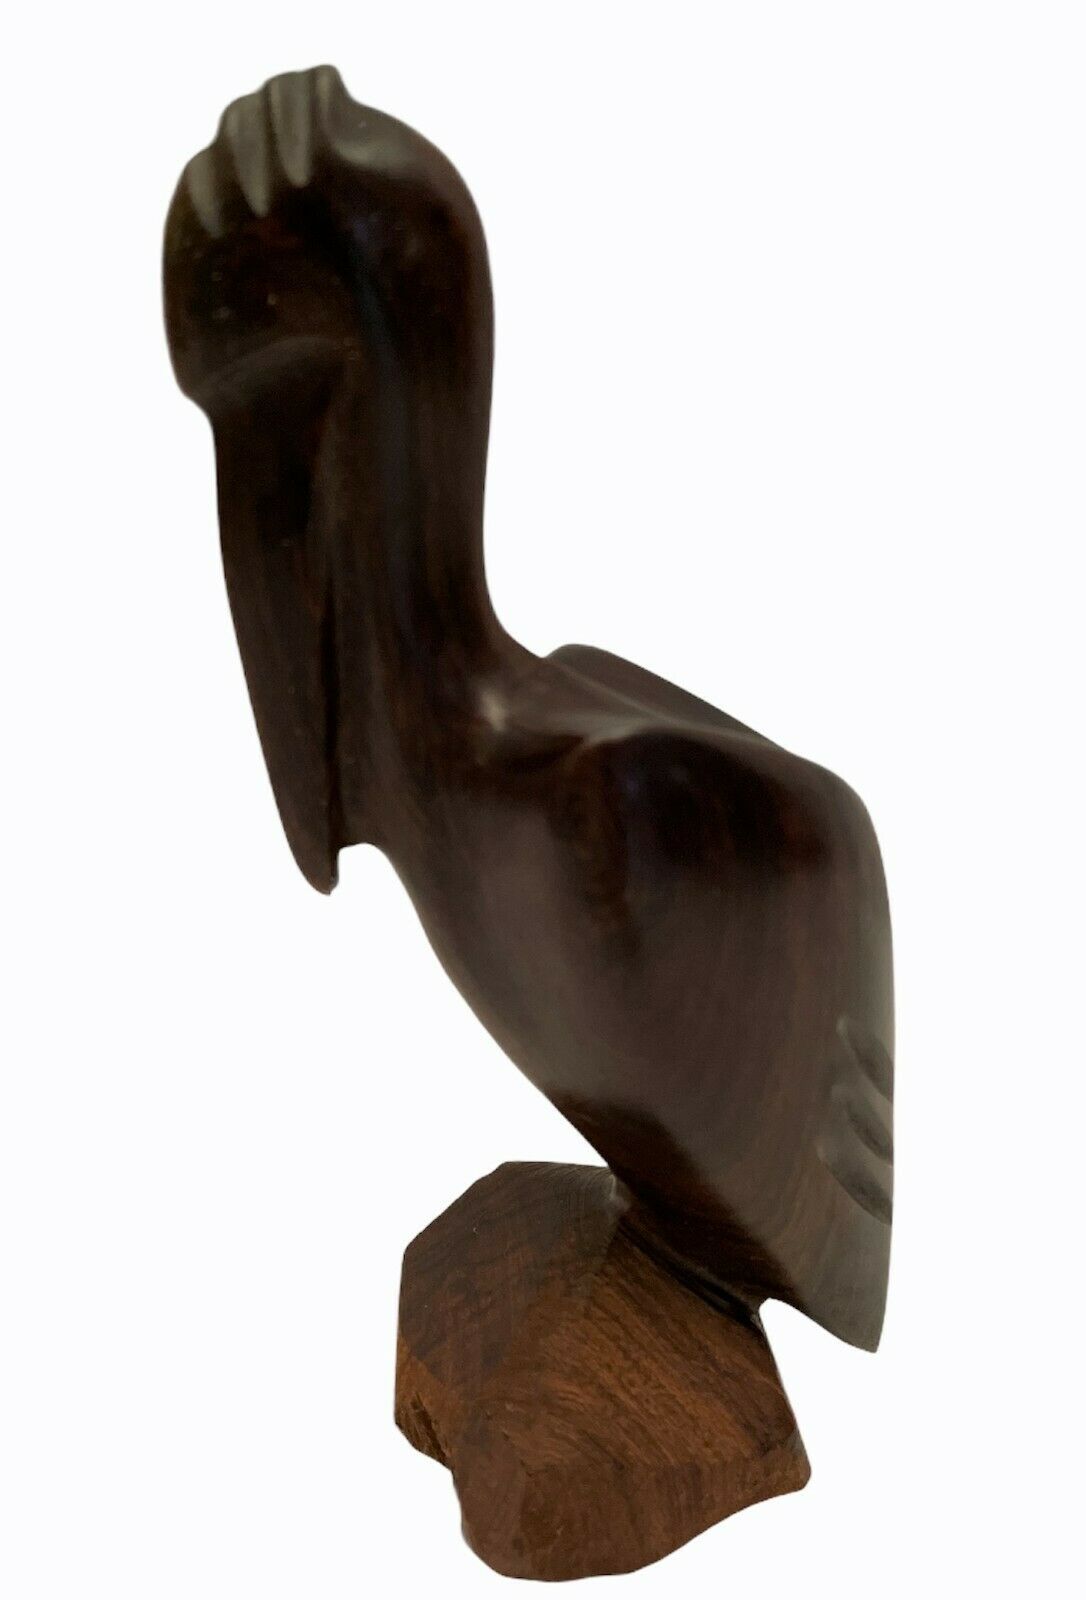 Vintage Joba Hand Carved Ironwood Wood Pelican 6" From Mexico Iron Wood